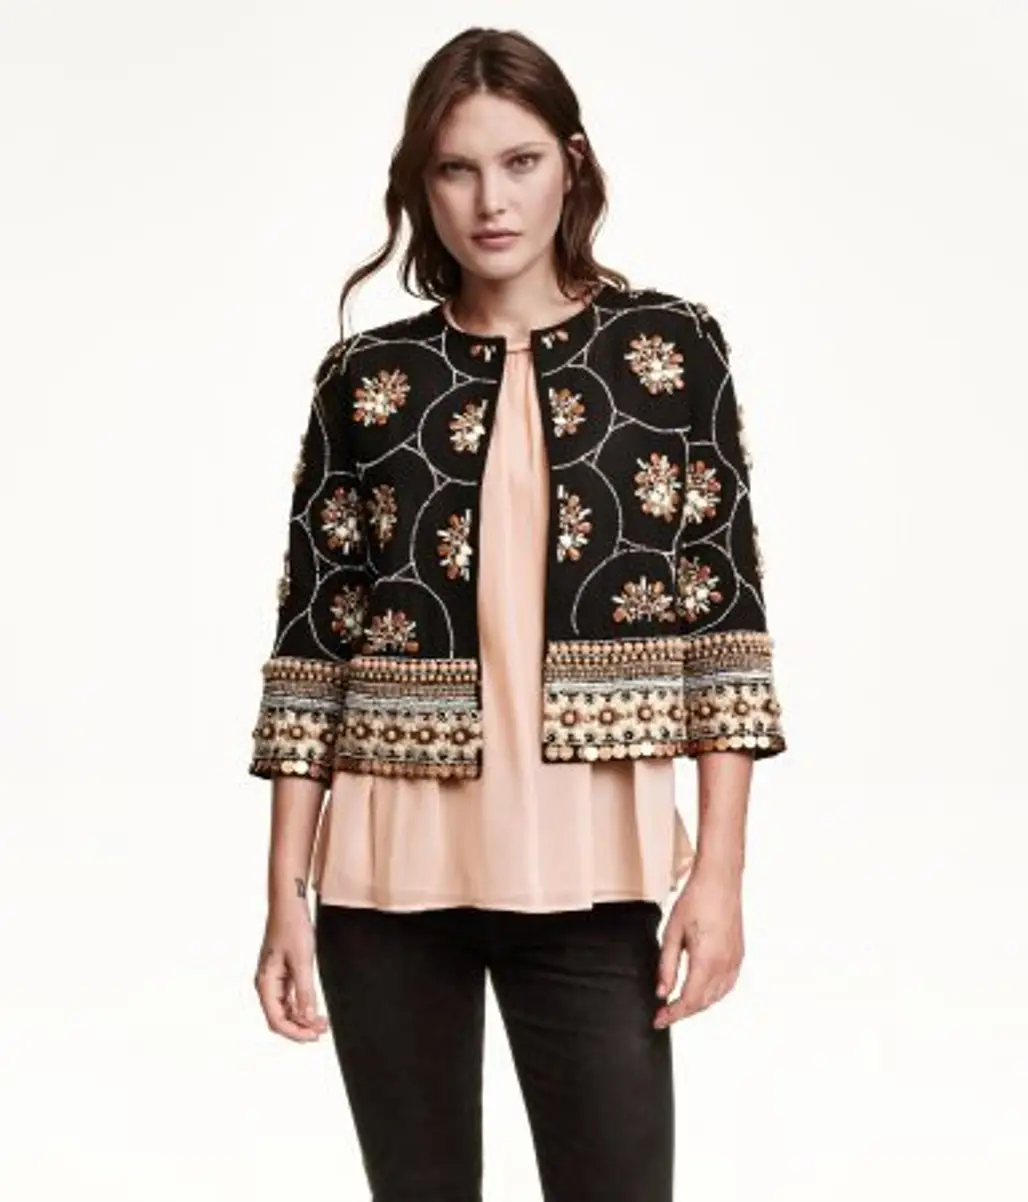 Black Jacket with Beaded Embroidery